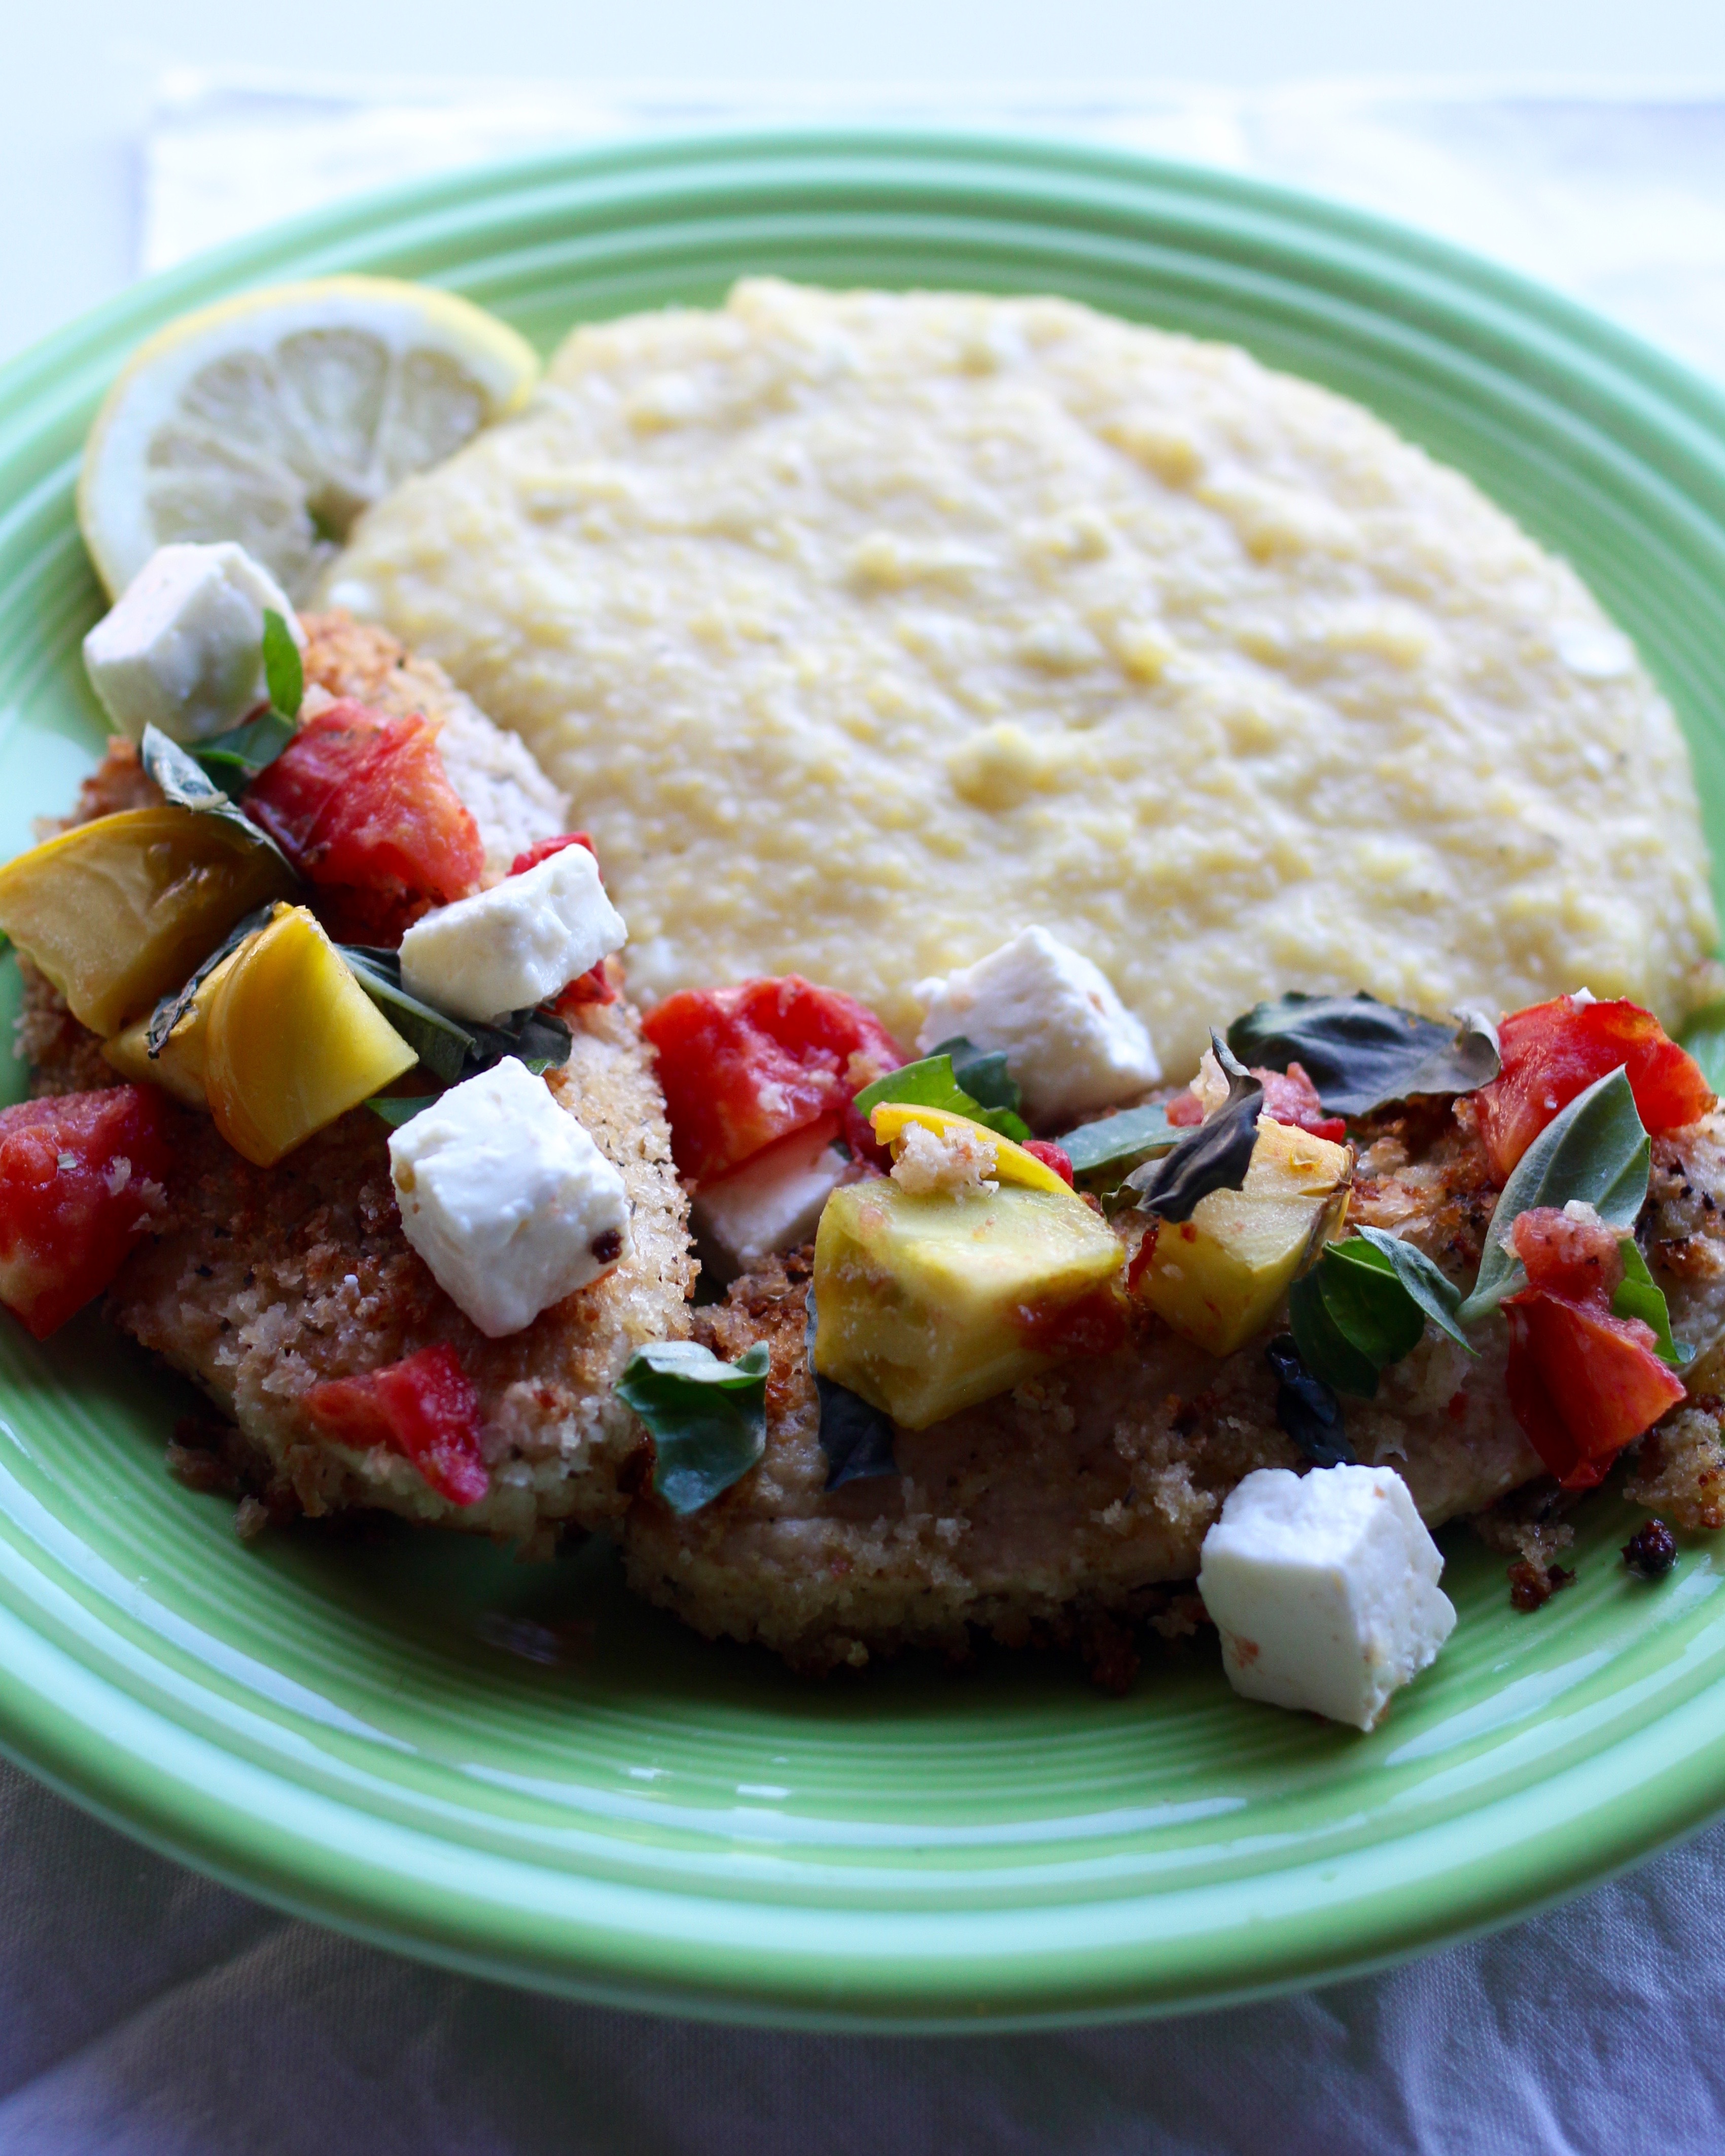 Forbidden Rice Blog: Breaded Chik'n Cutlets with Heirloom Tomatoes and Feta | Quorn